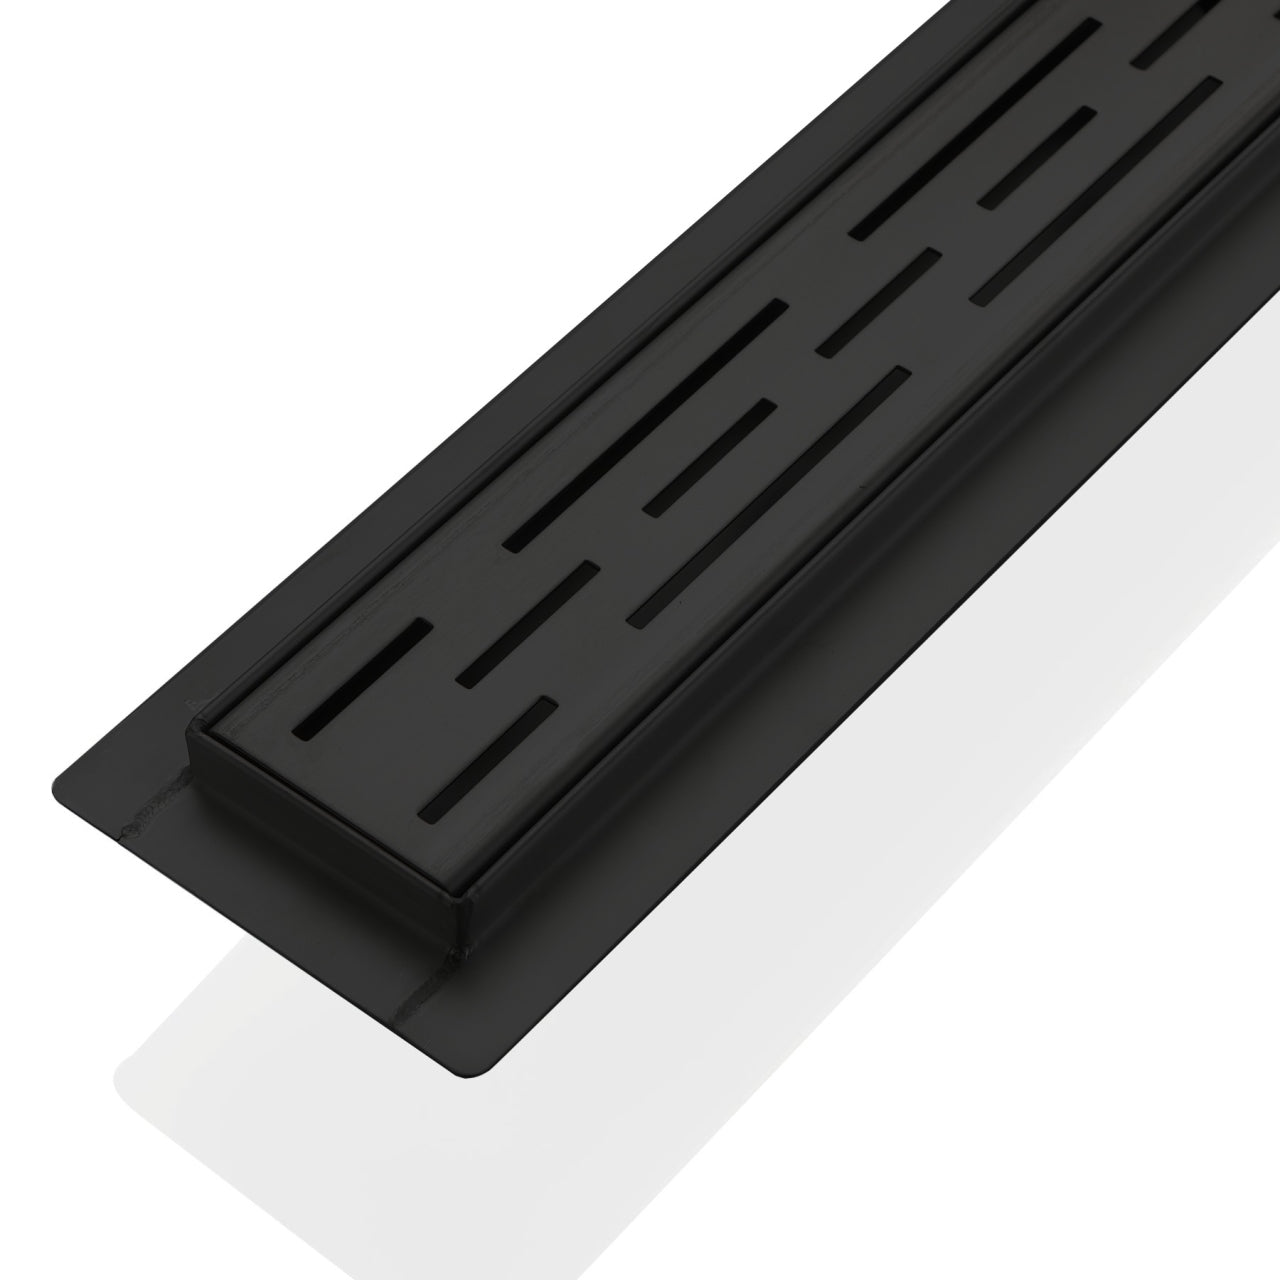 Kube 27.5" Linear Drain with Linear Grate - Bhdepot 